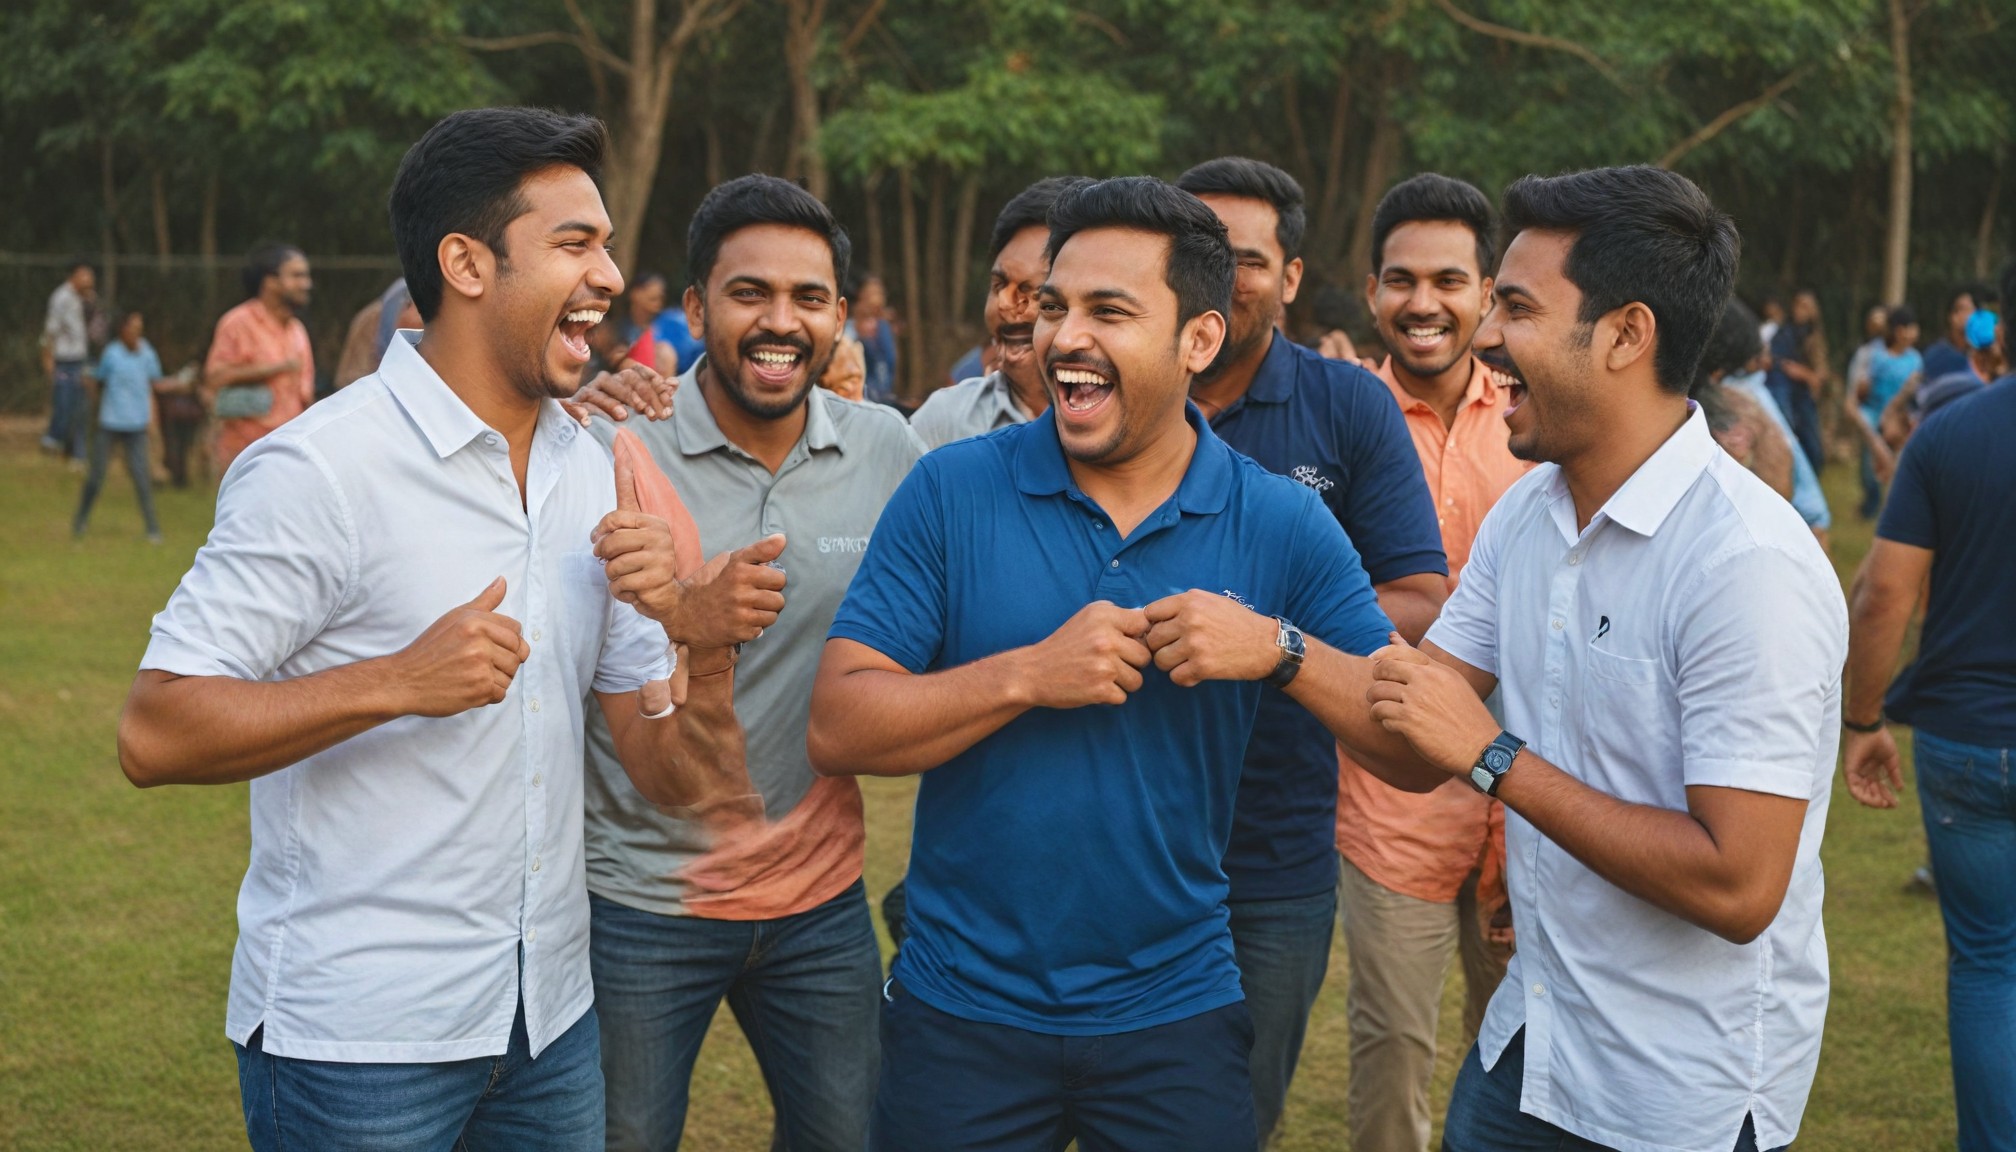 Excited laughter and camaraderie during a high-energy outdoor game at Mileage Global's team-building event in Bangalore.